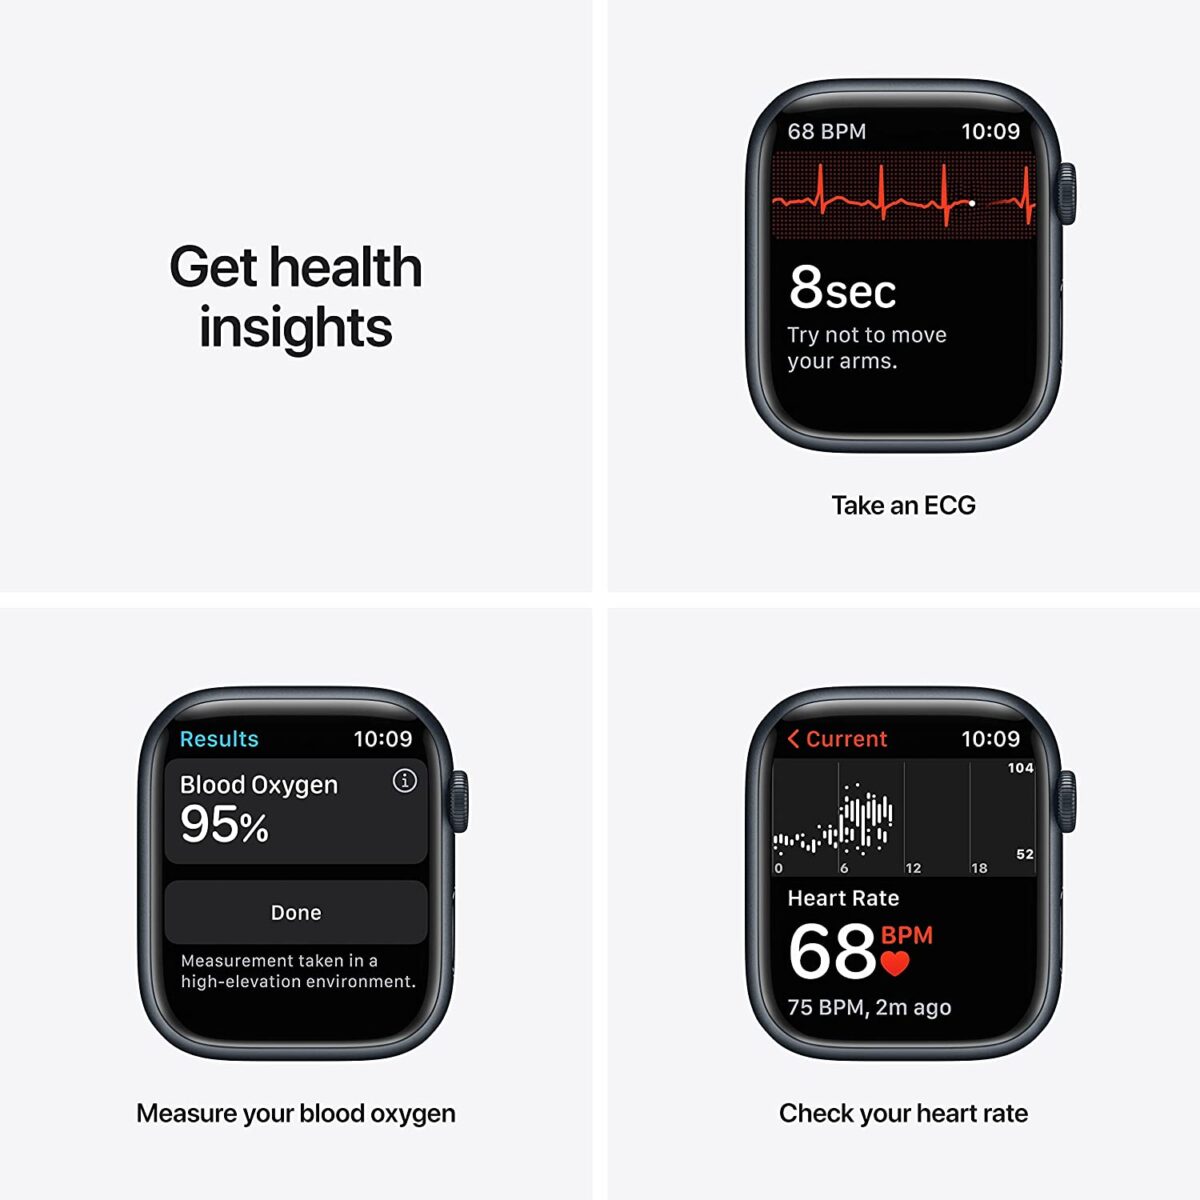 Get health insights with Apple Watch Series 7